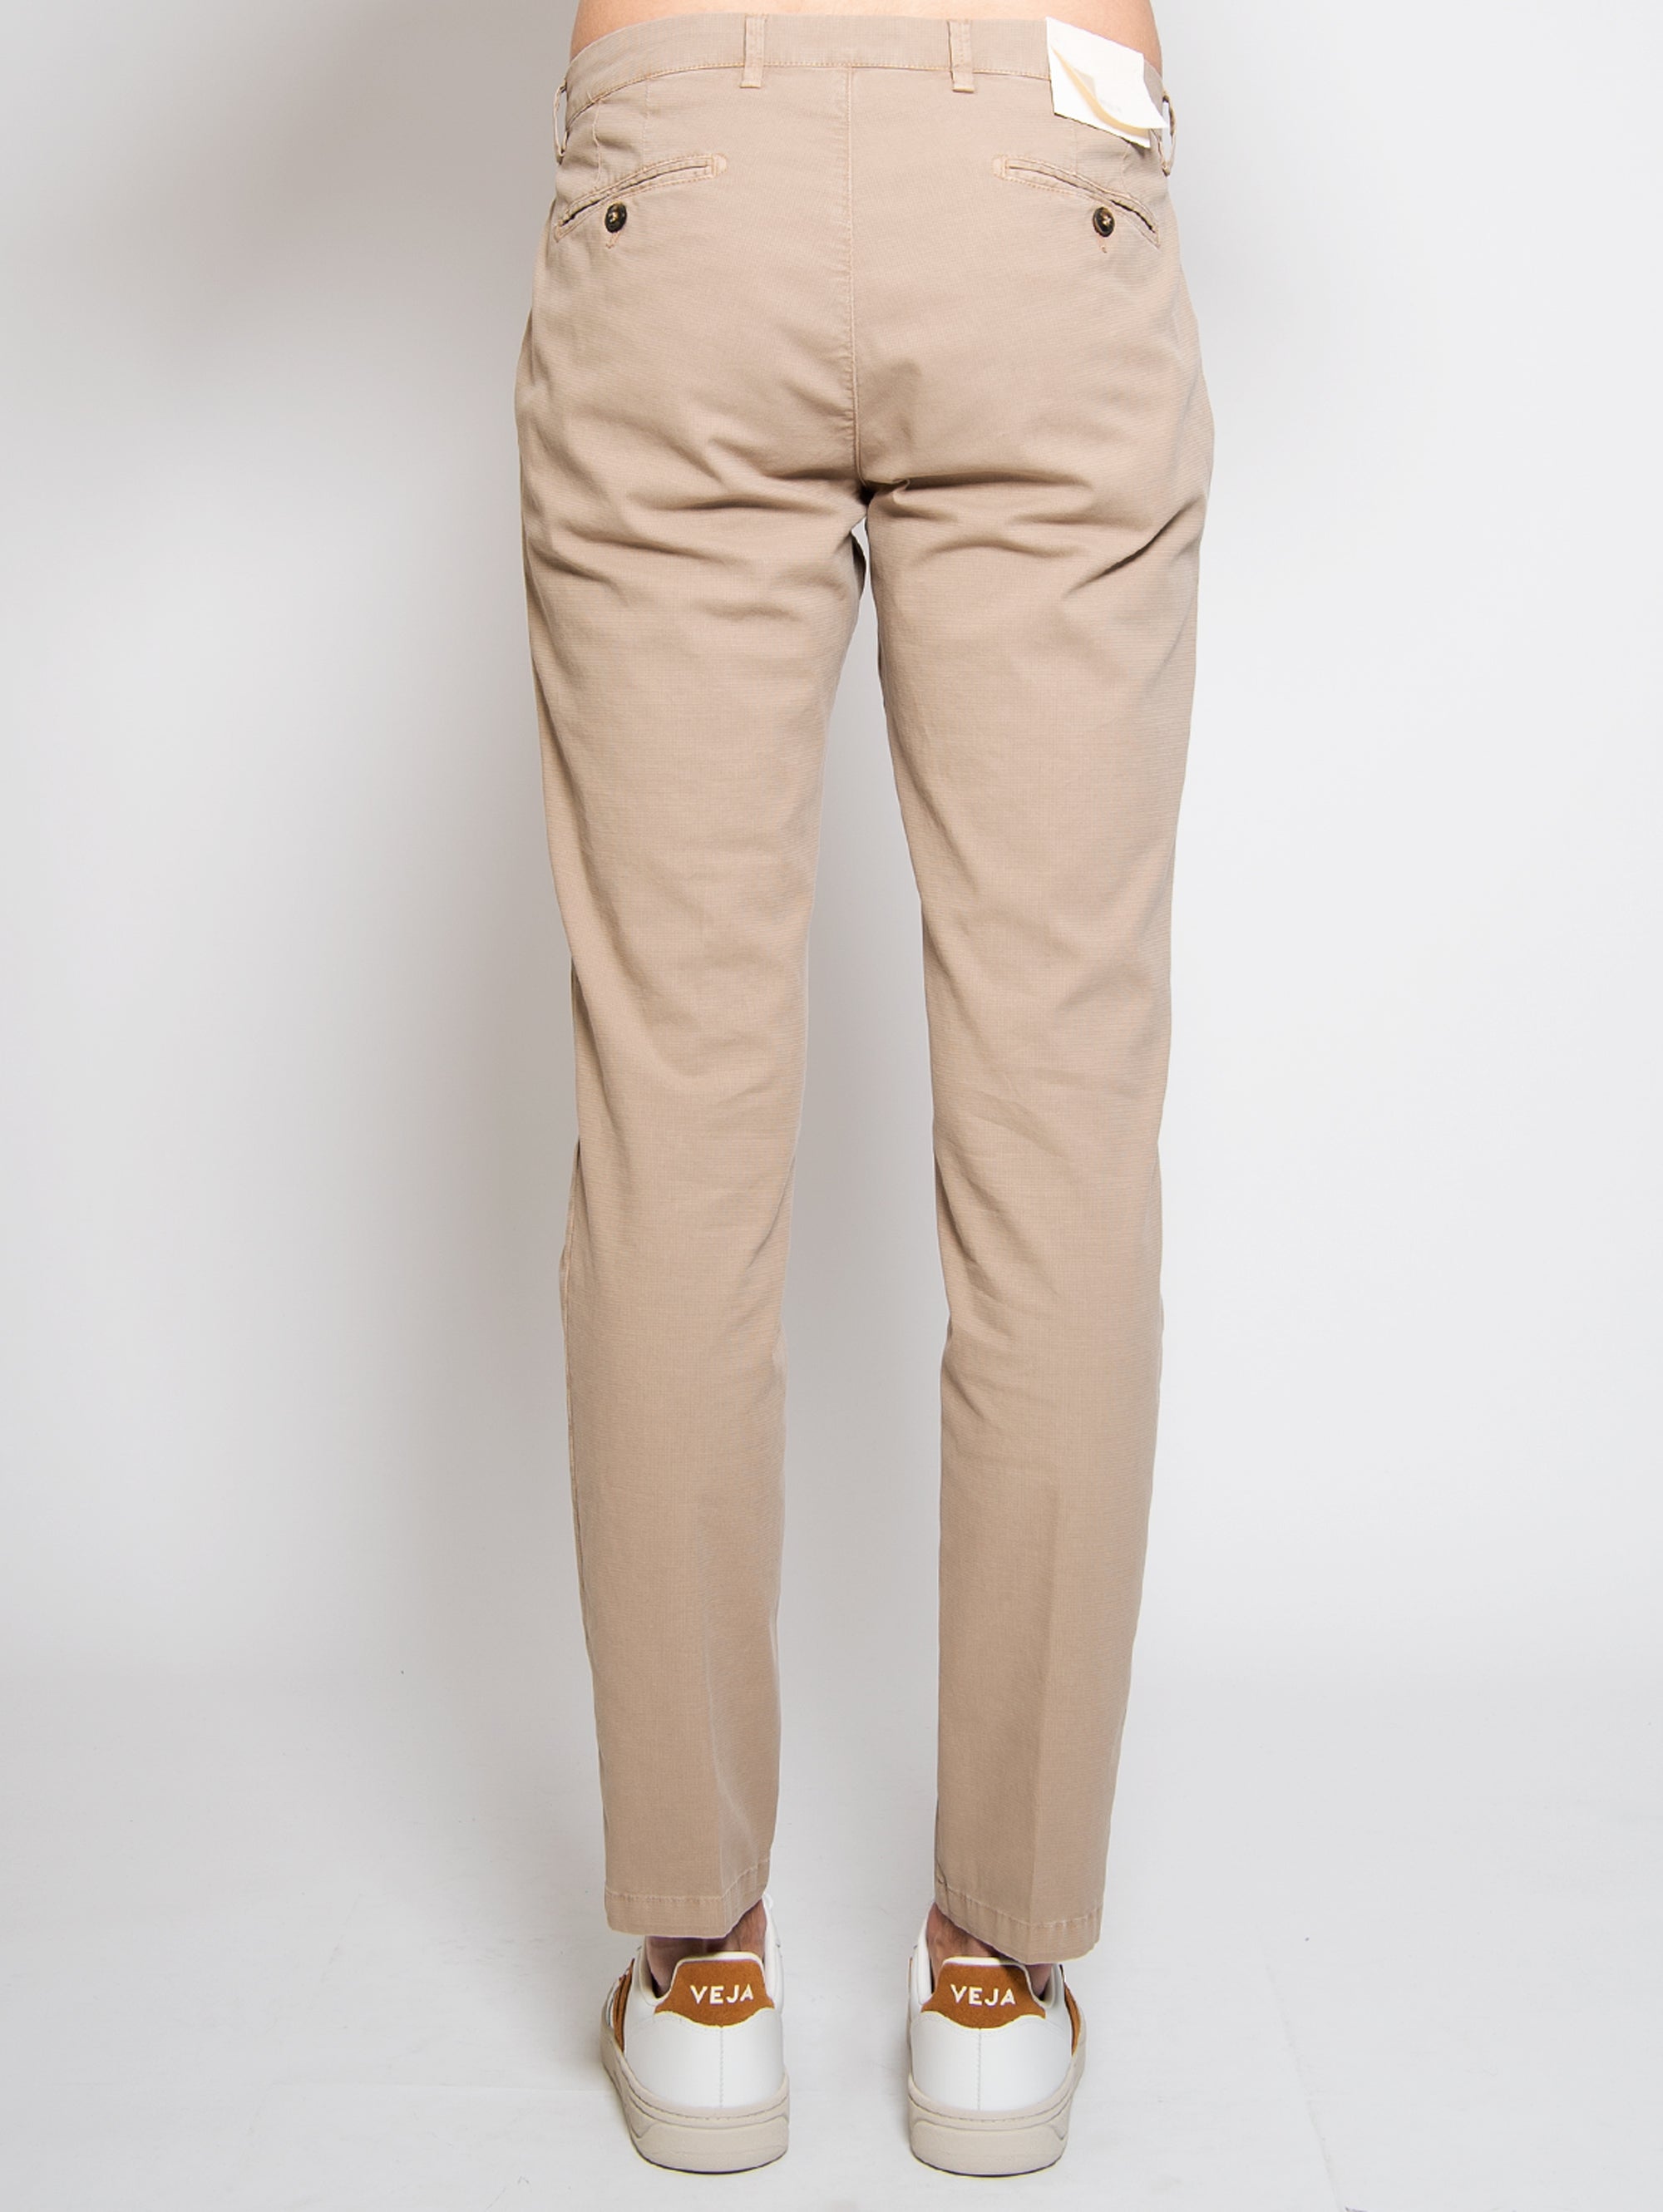 Beige Textured Cotton Trousers